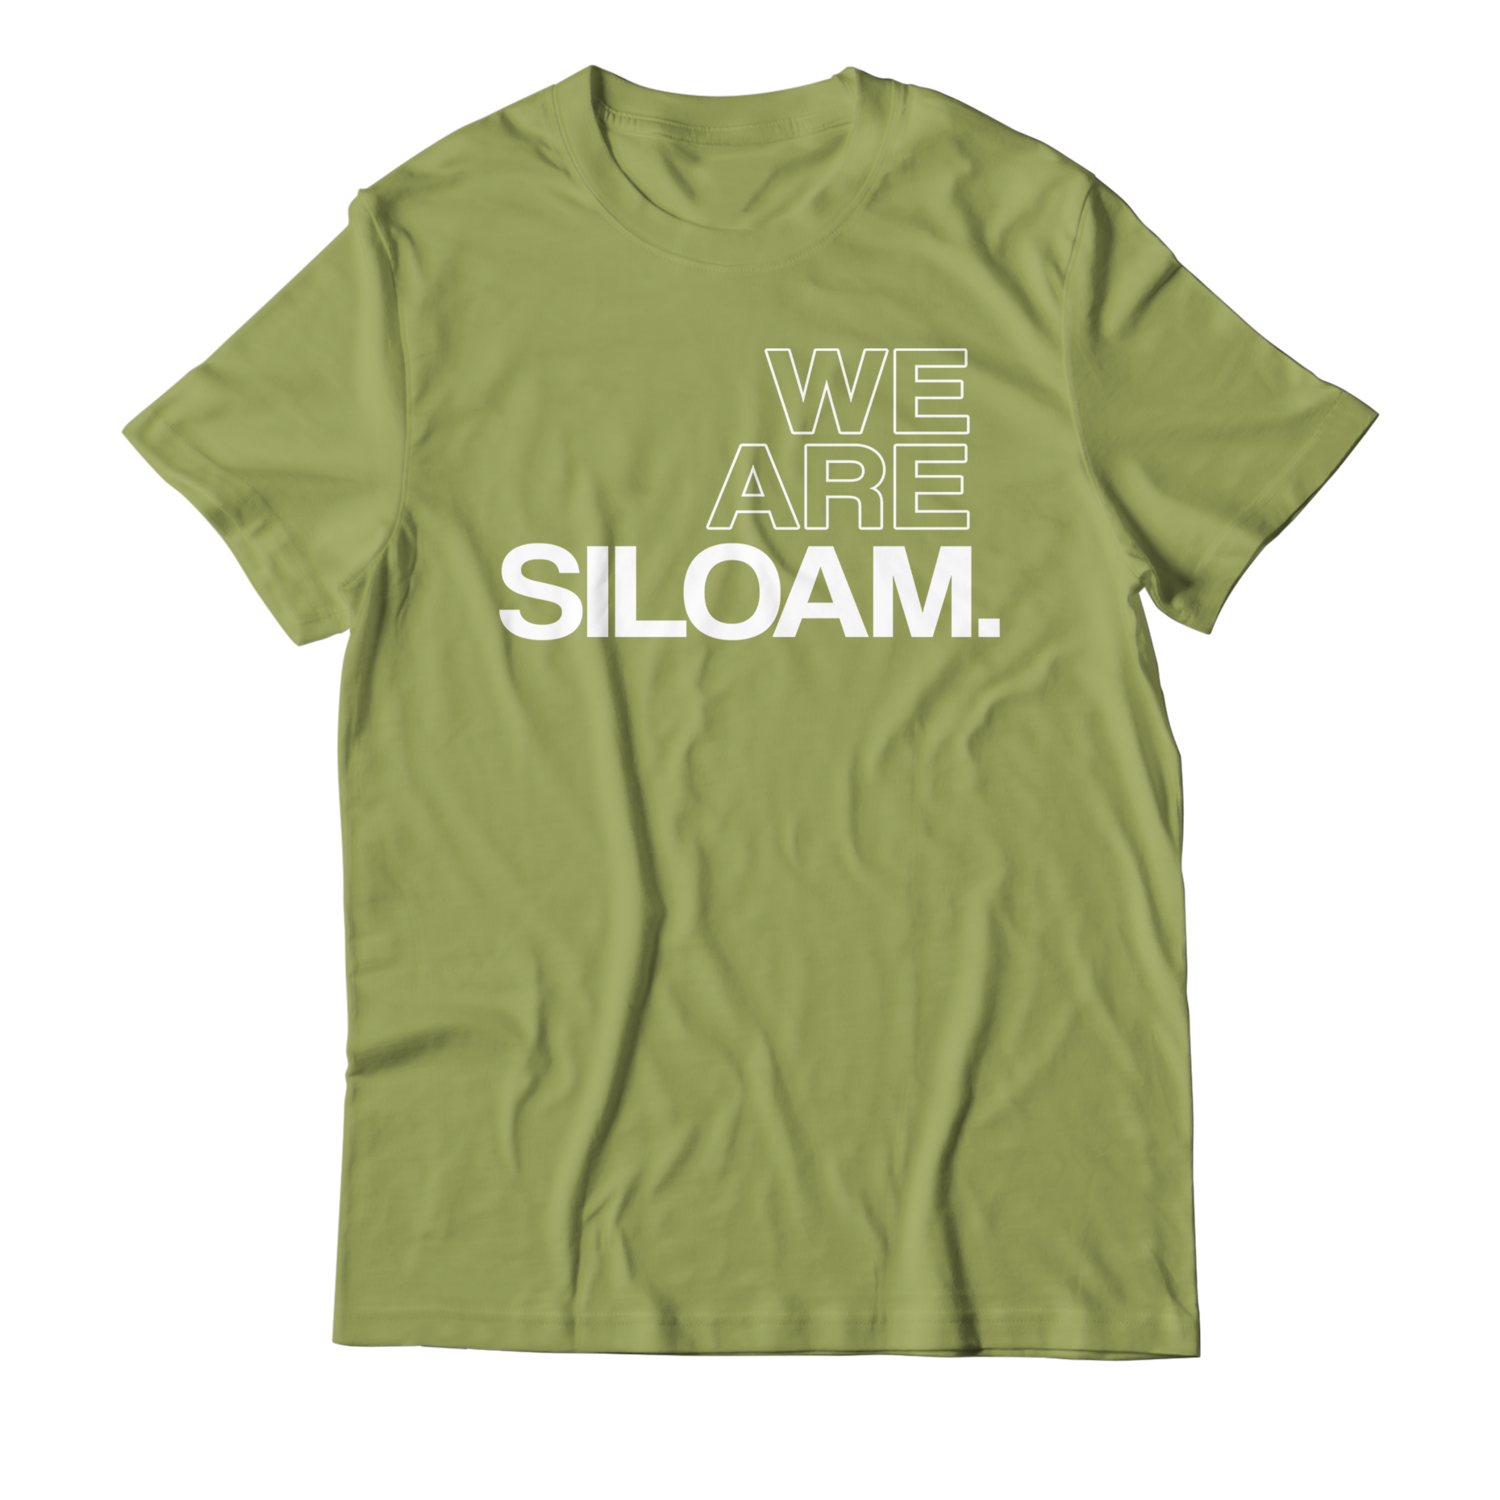 We Are Siloam T-shirt - Olive Green & White